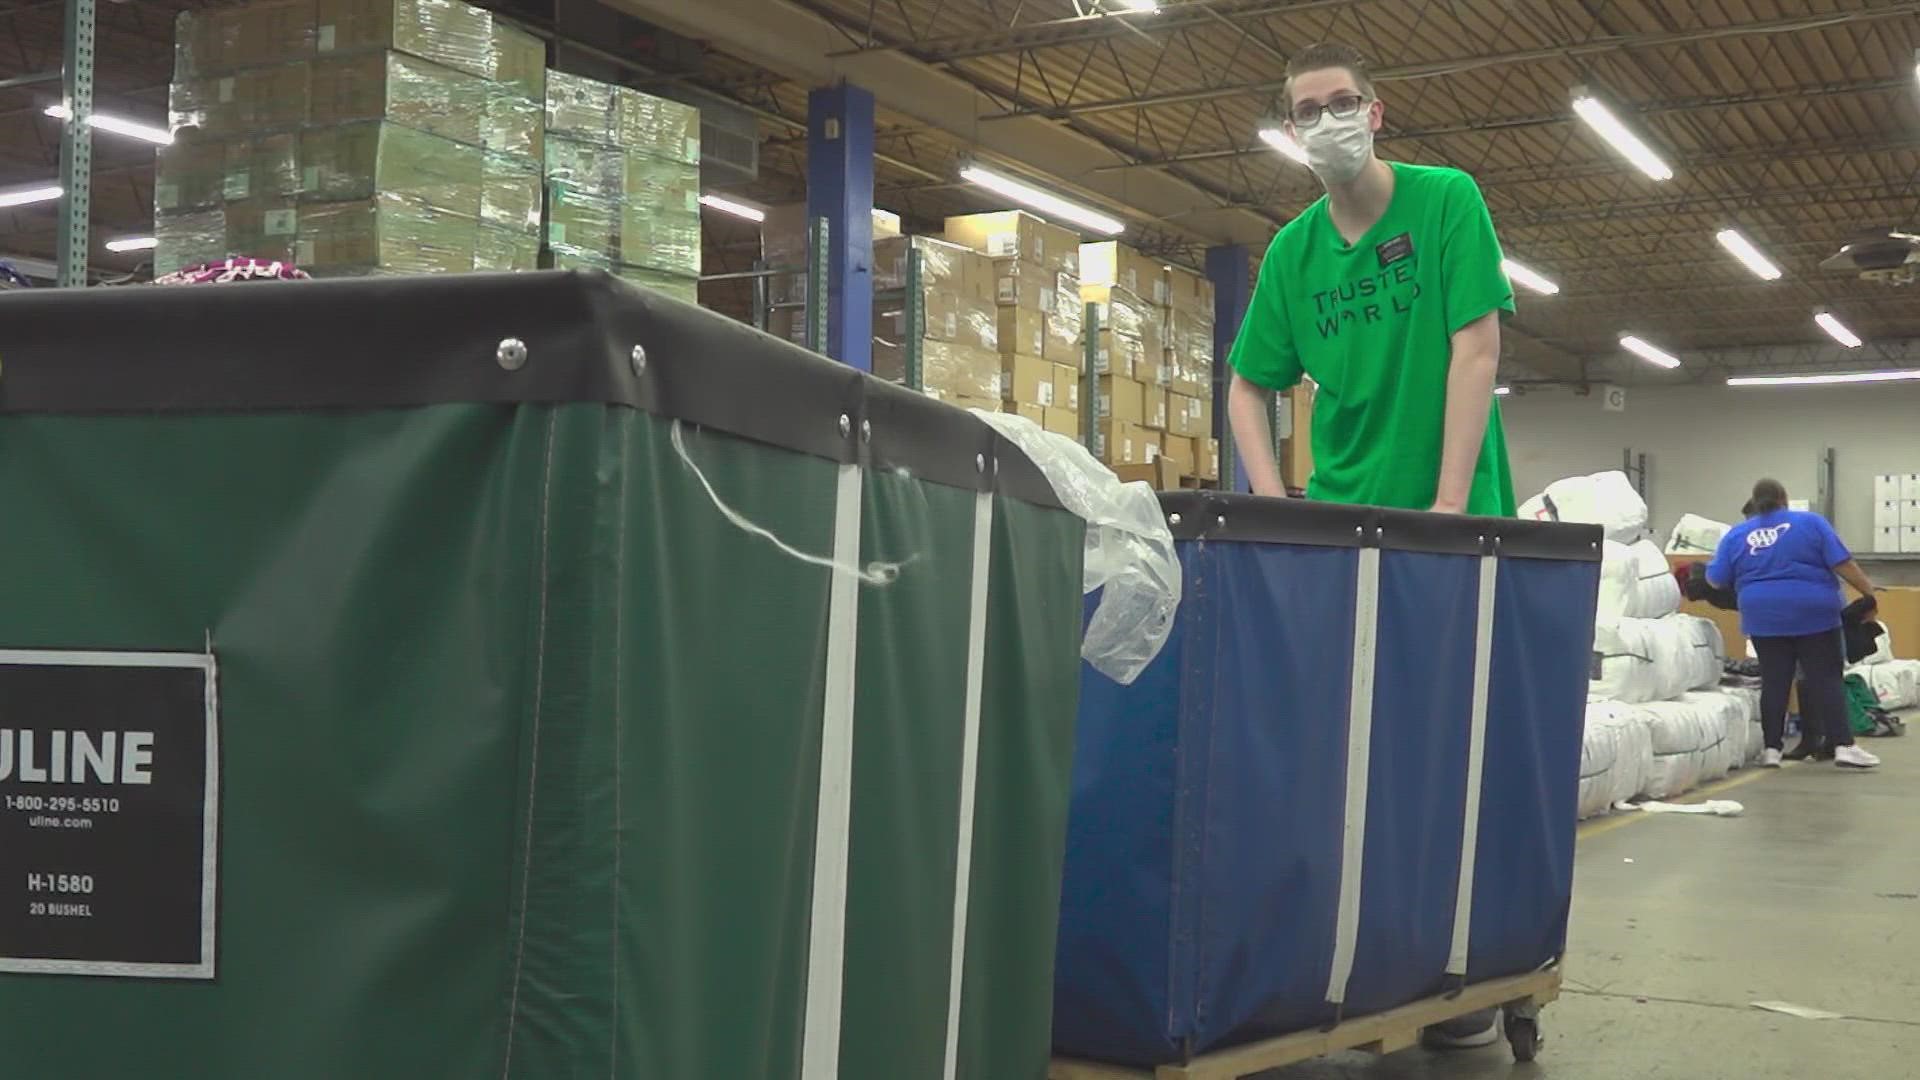 Caleb Wood spends his time volunteering at Trusted World in Garland and doesn't let his health challenges limit him.